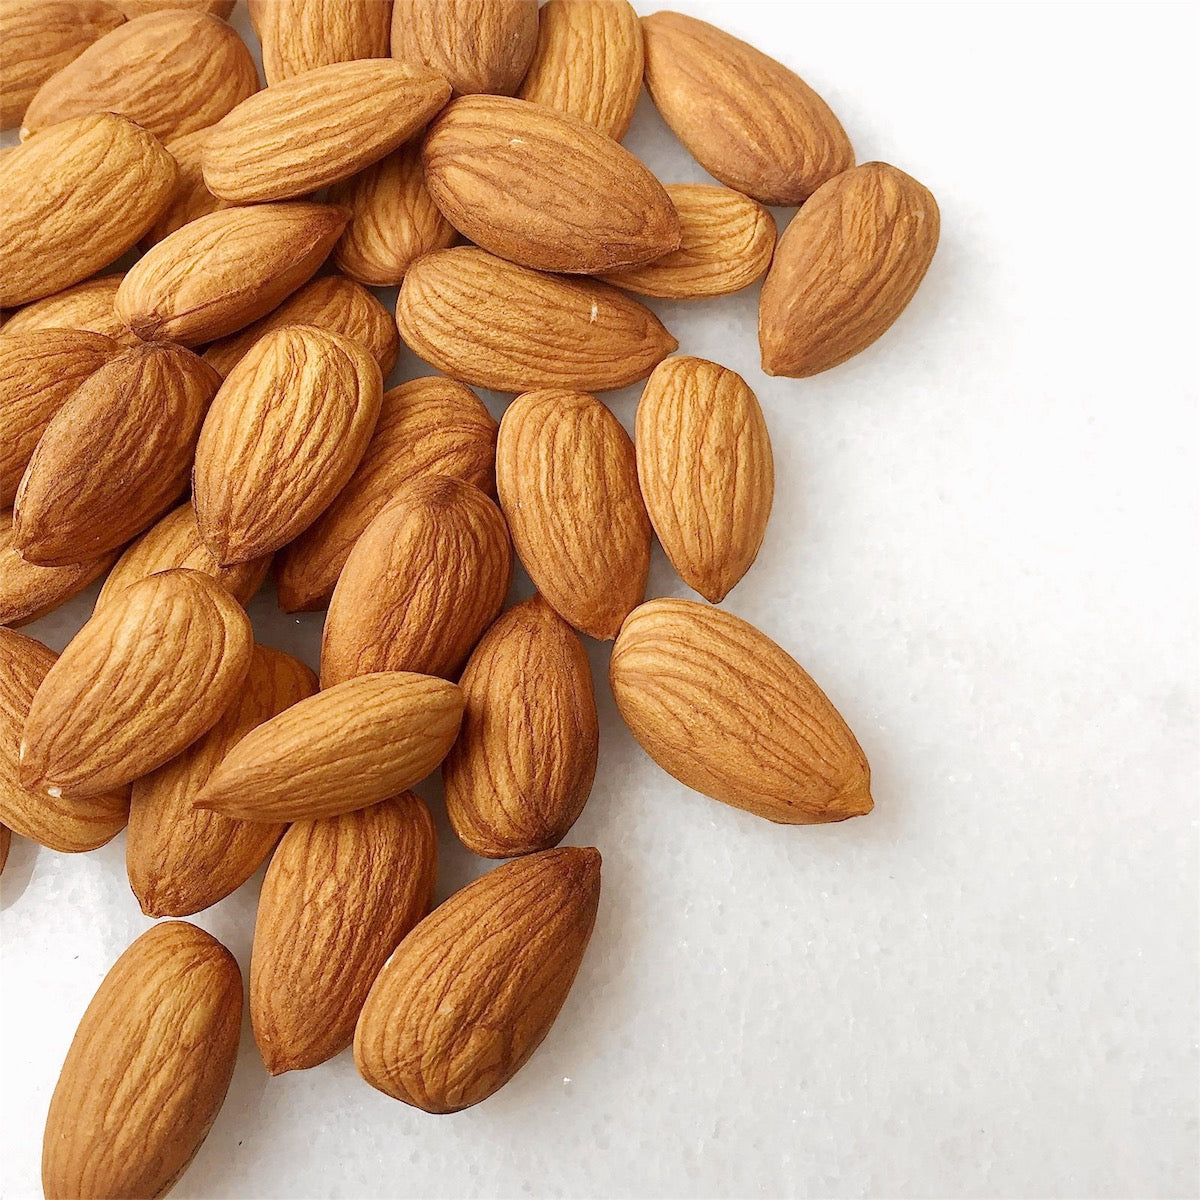 Almonds • Sprouted • Australia